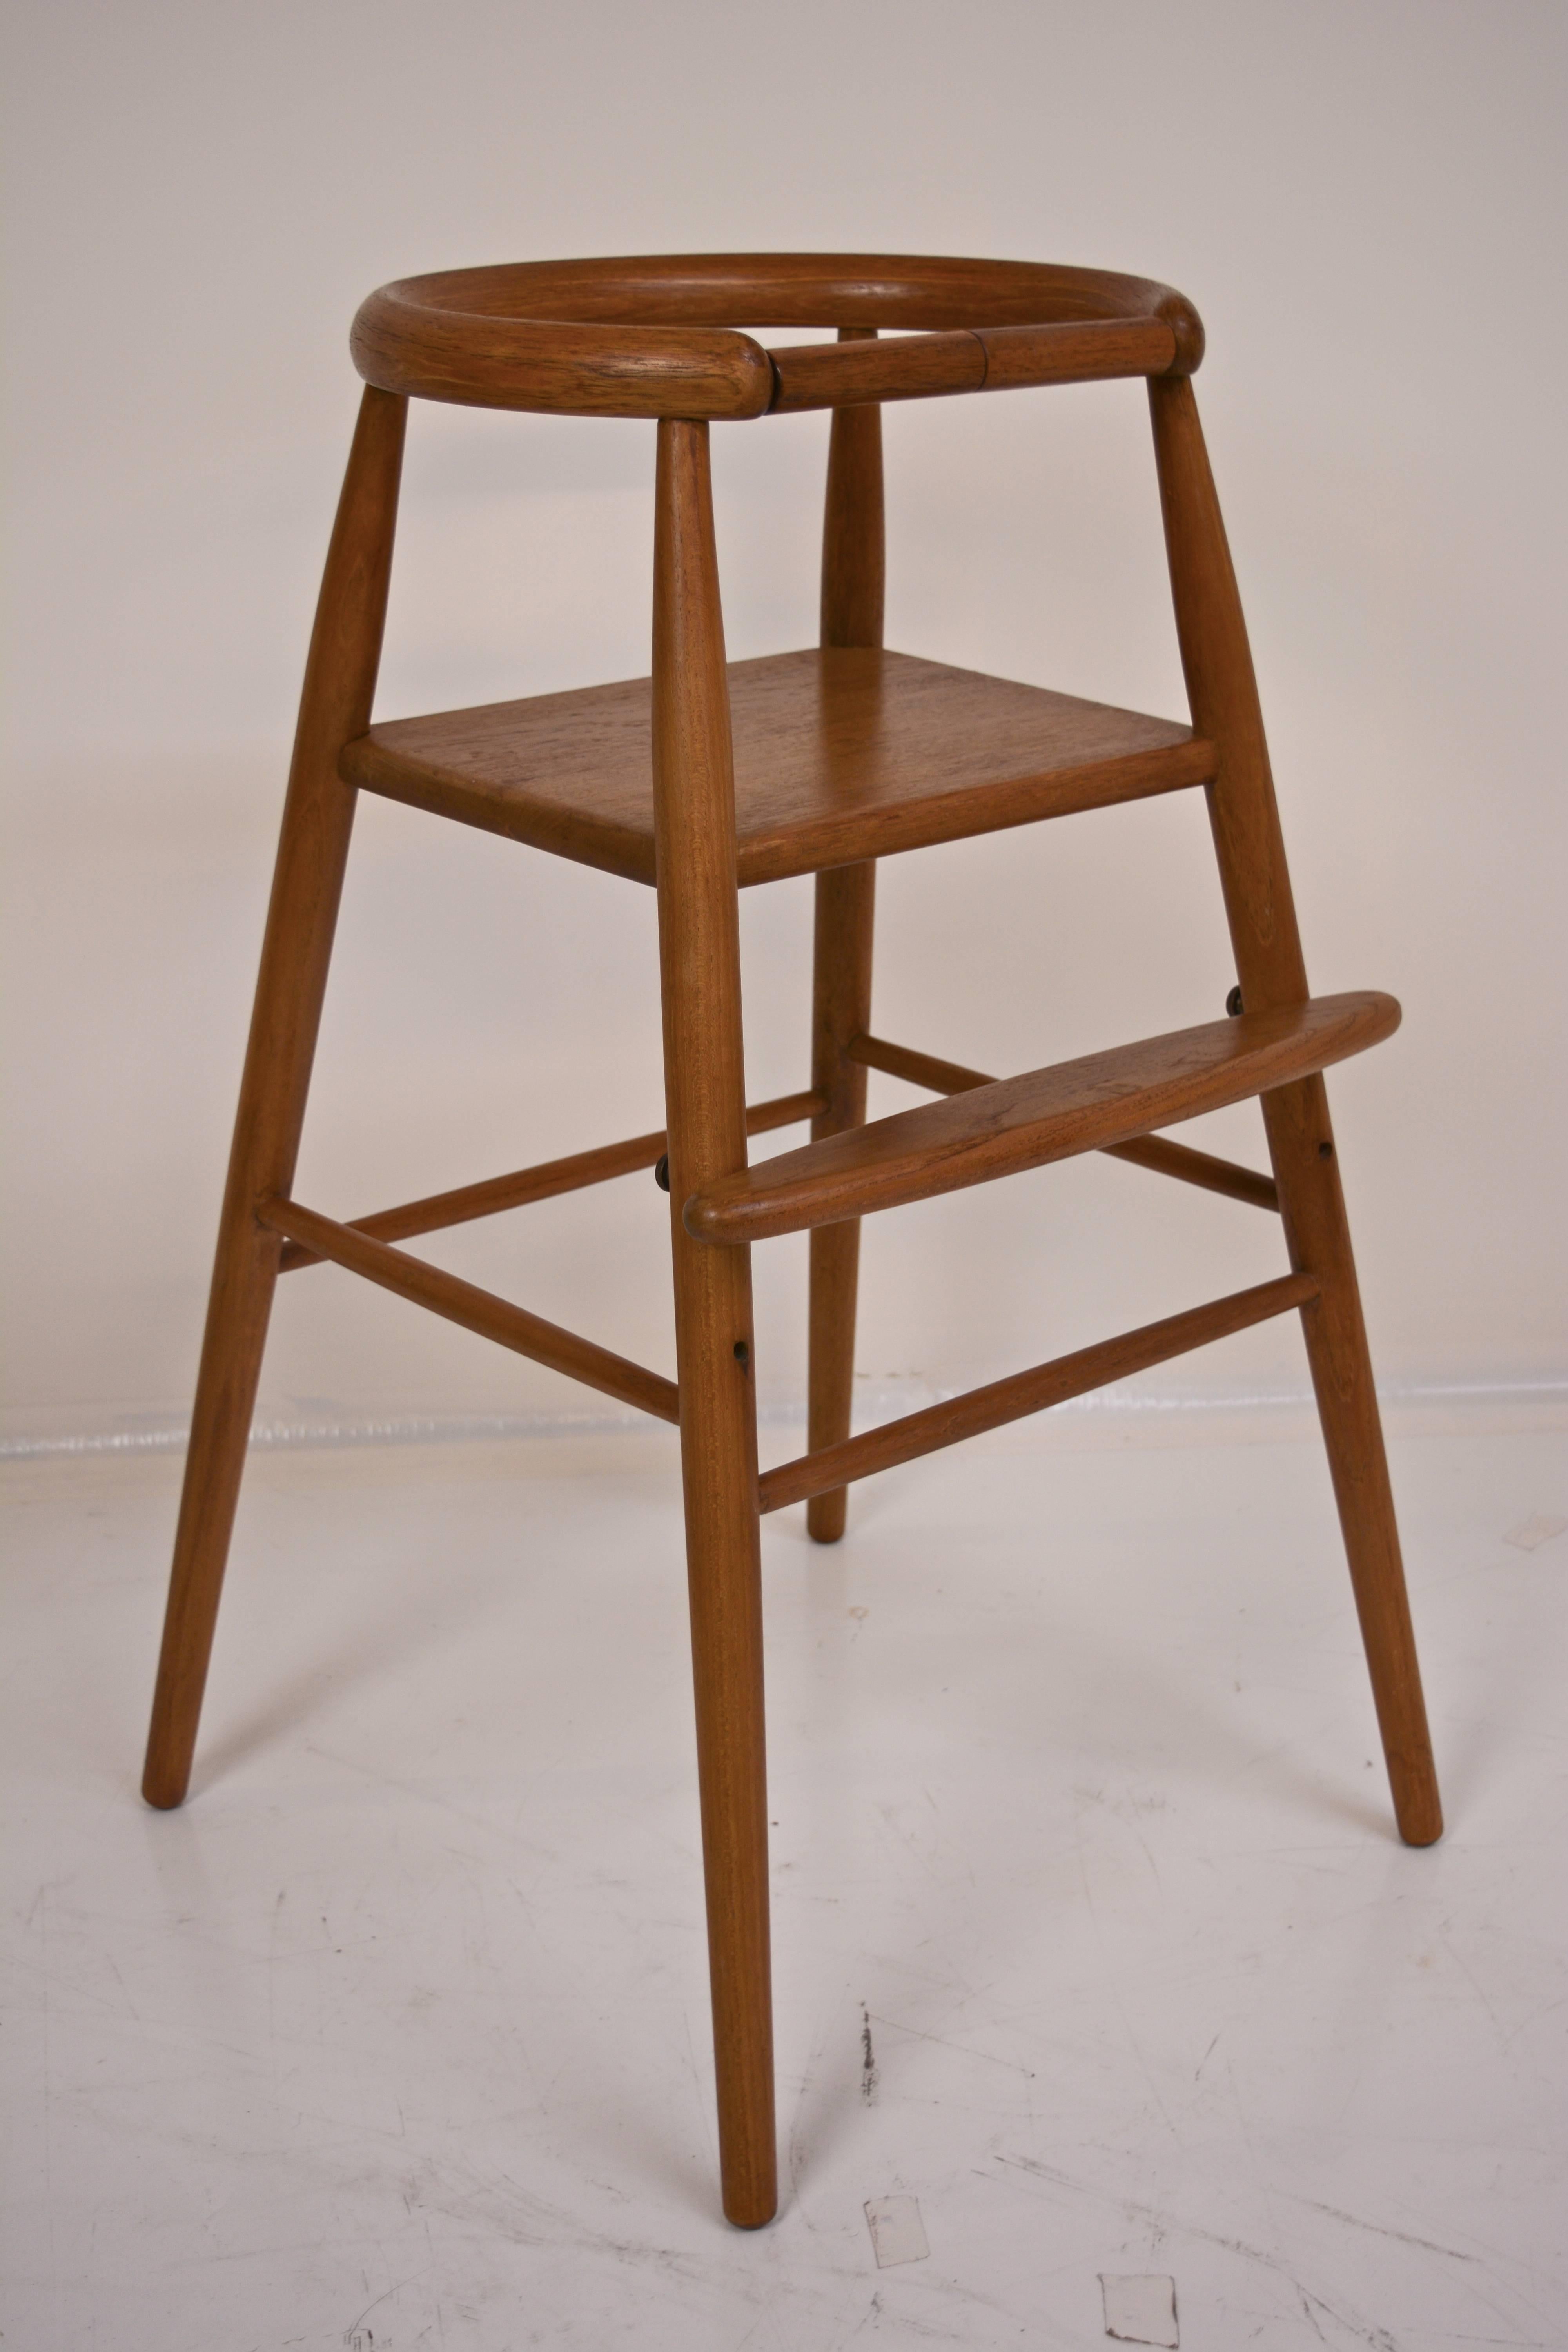 Solid teak child's high chair by Nanna Ditzel. Adjustable footrest. Excellent lacquer finished wood, circa 1950s.
  